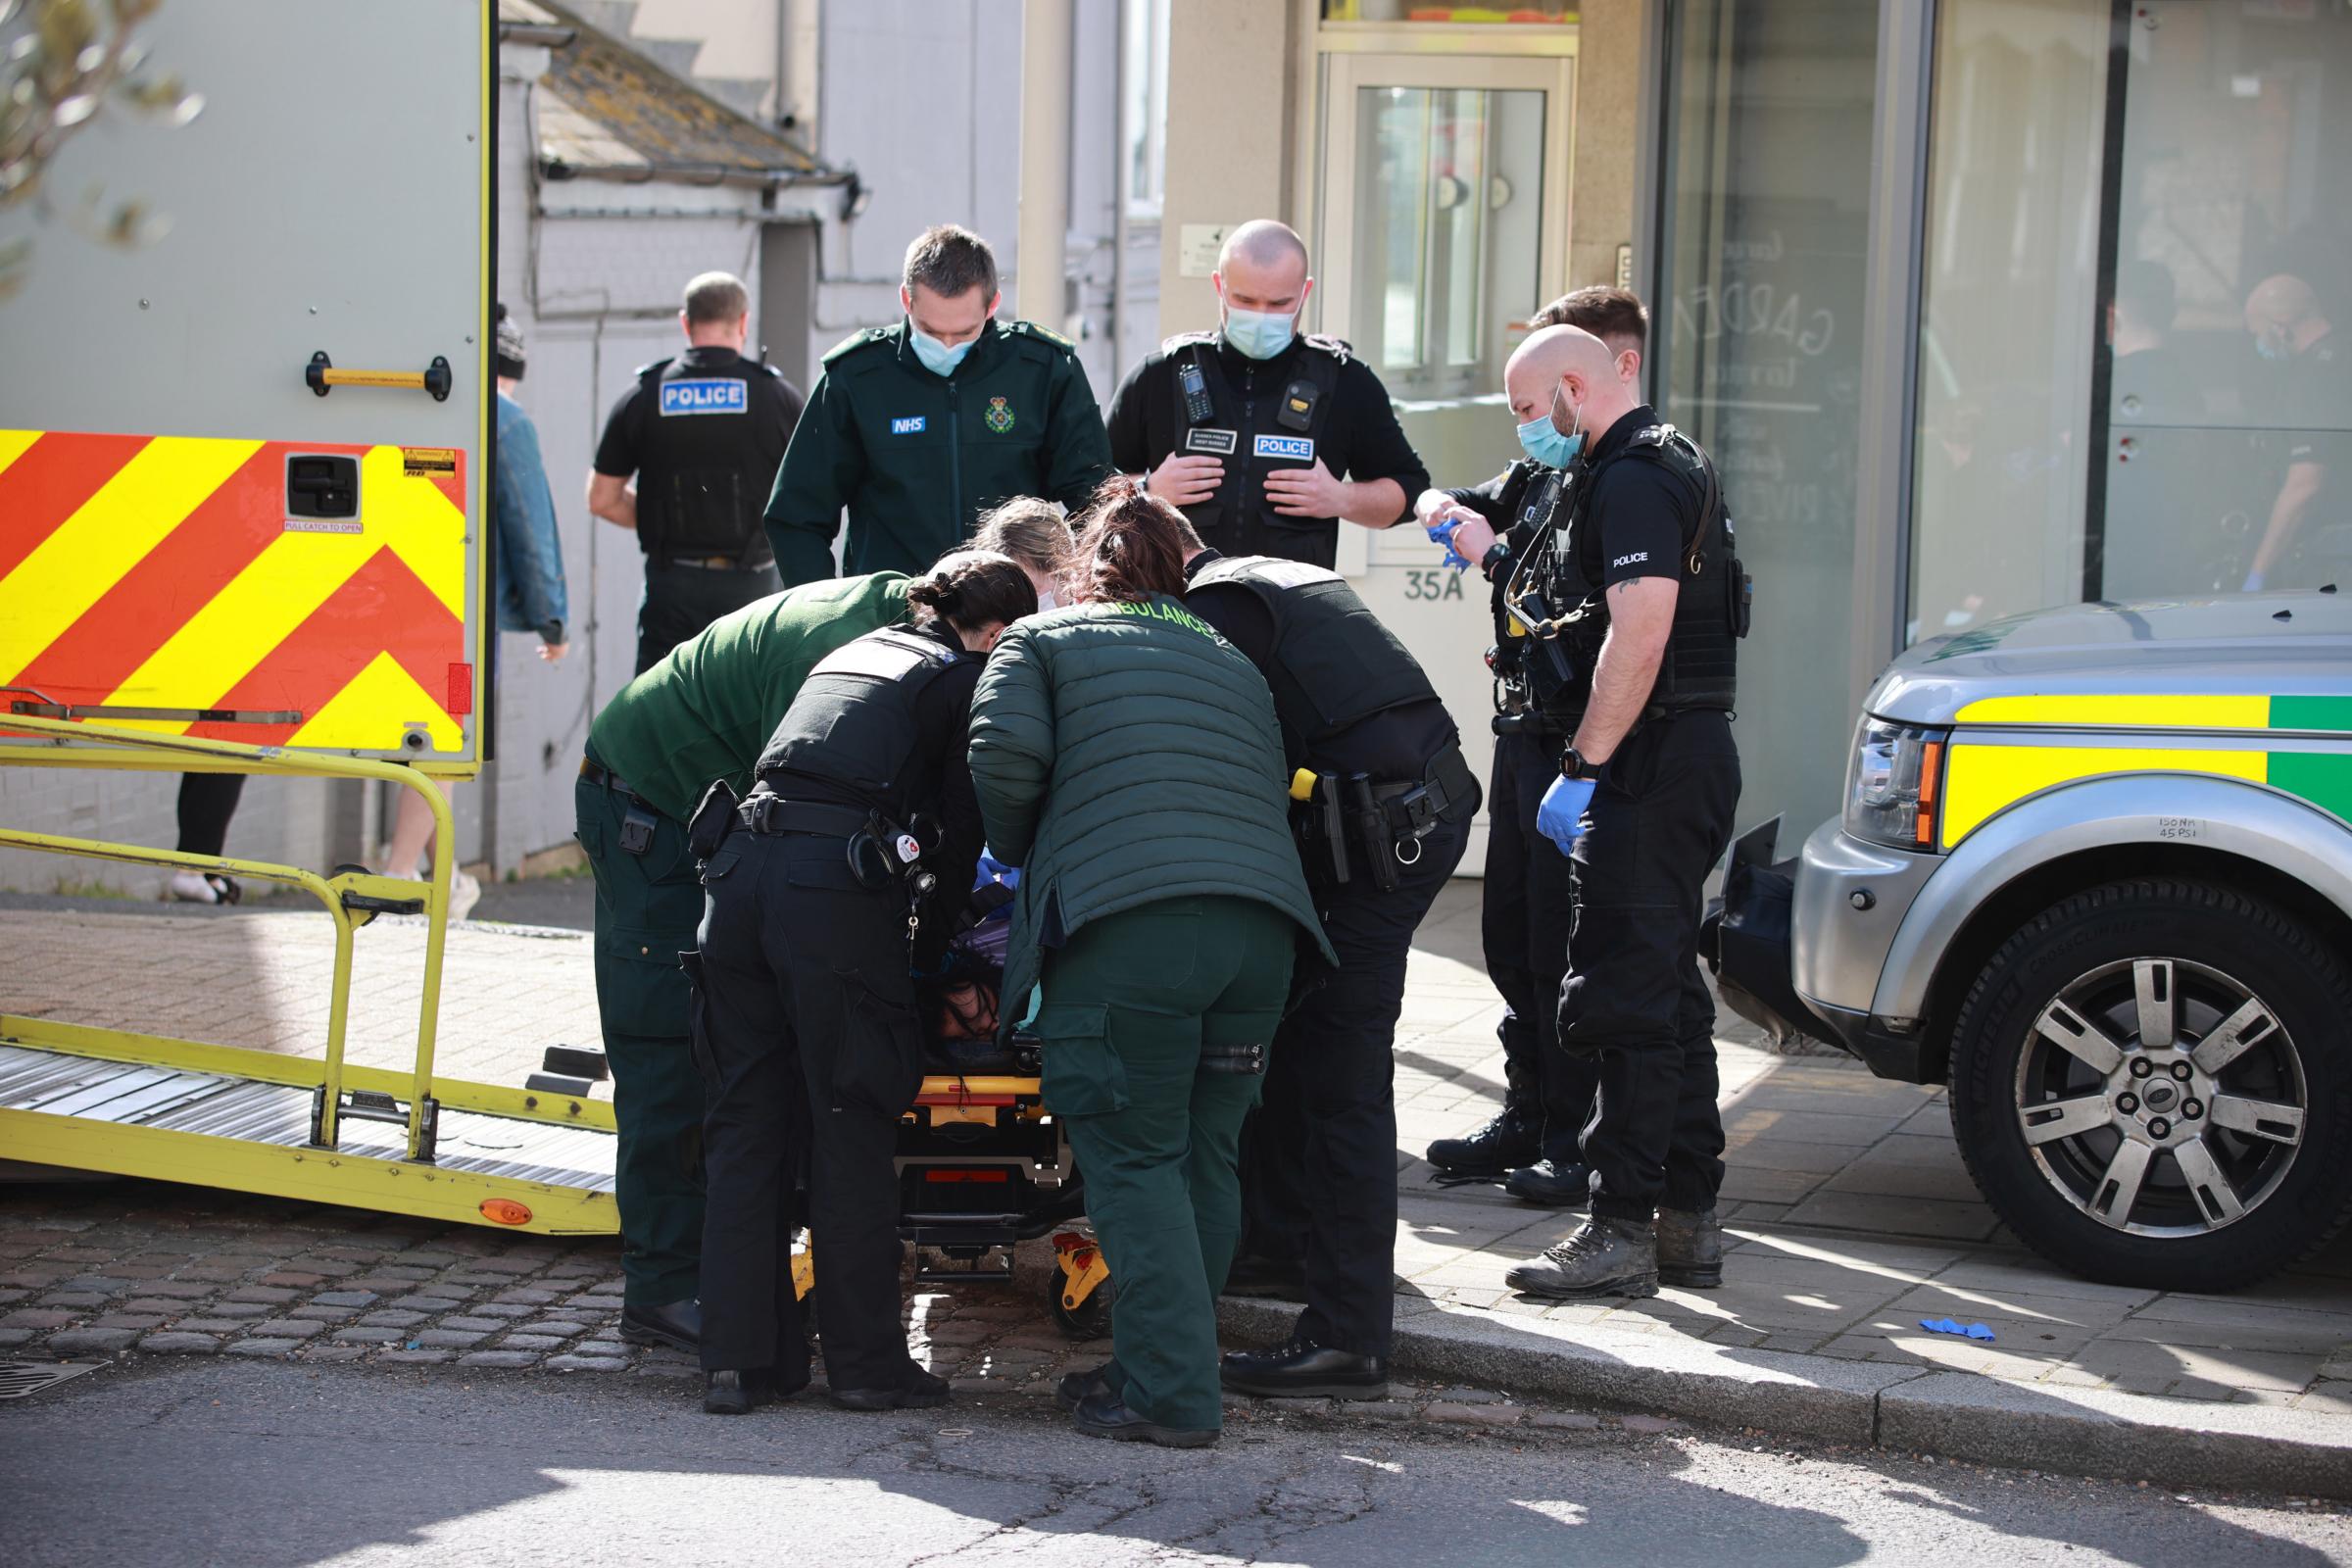 Police and paramedics were called over reports of a woman in distress in Shoreham High Street